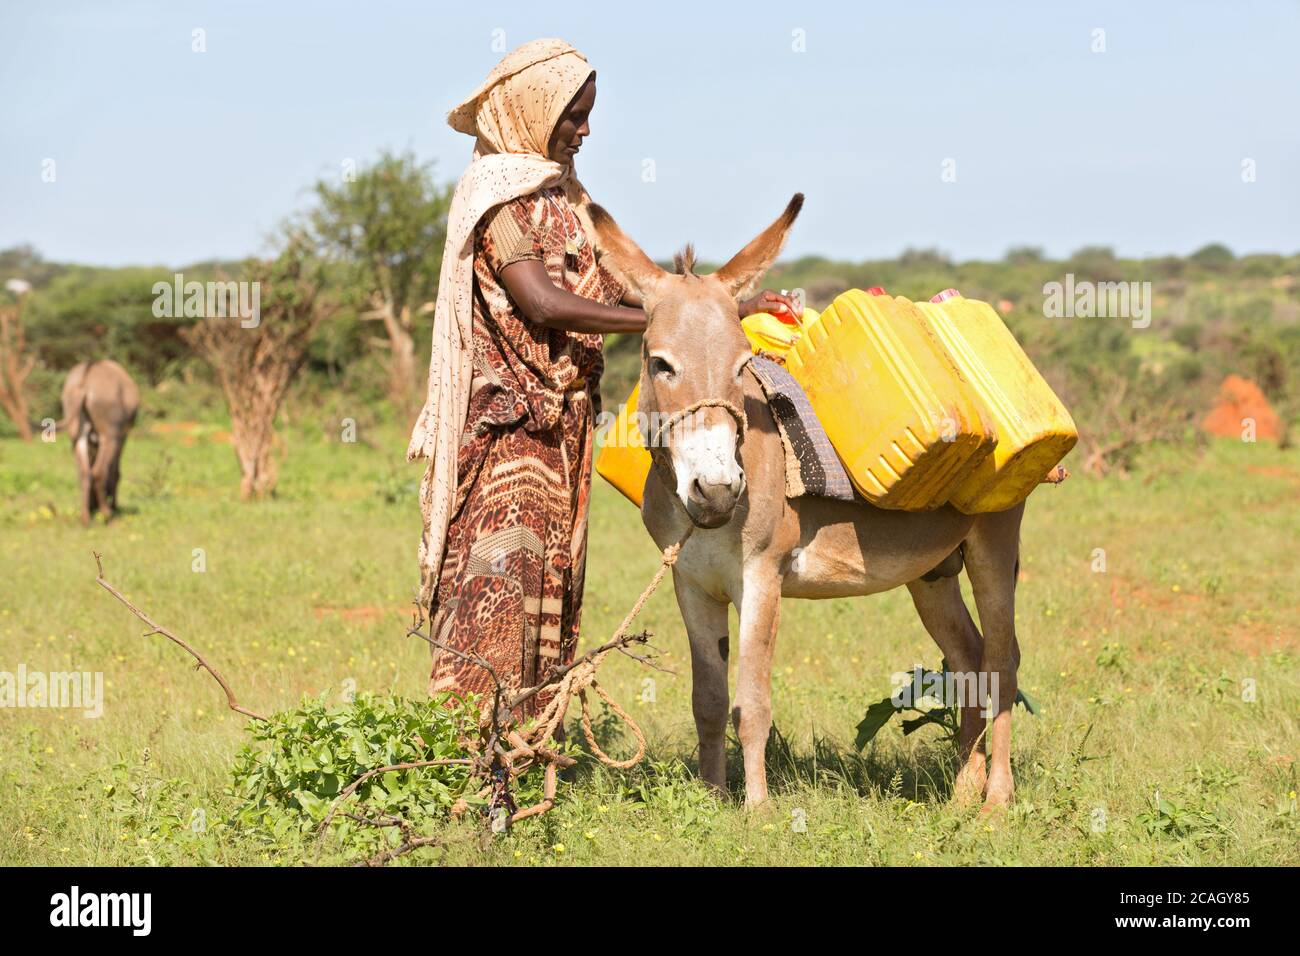 13.11.2019, Gabradahidan, Somali Region, Ethiopia - A woman loads a donkey with a yellow water canister, filled with drinking water. Hydraulic enginee Stock Photo